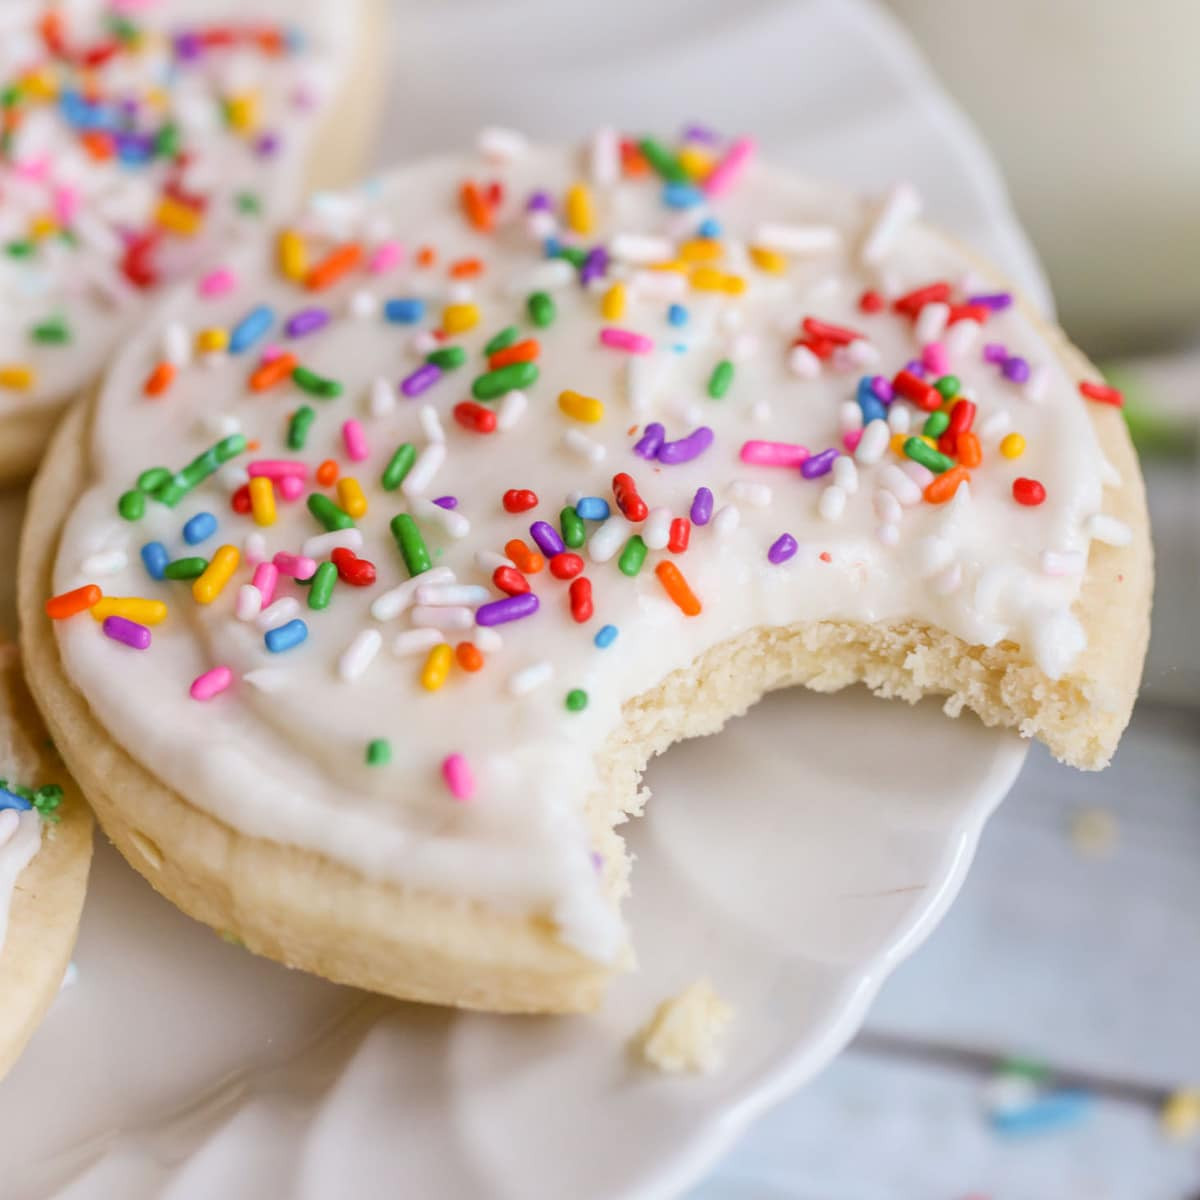 Best Sugar Cookie Icing New Best Sugar Cookie Recipe with Homemade Frosting